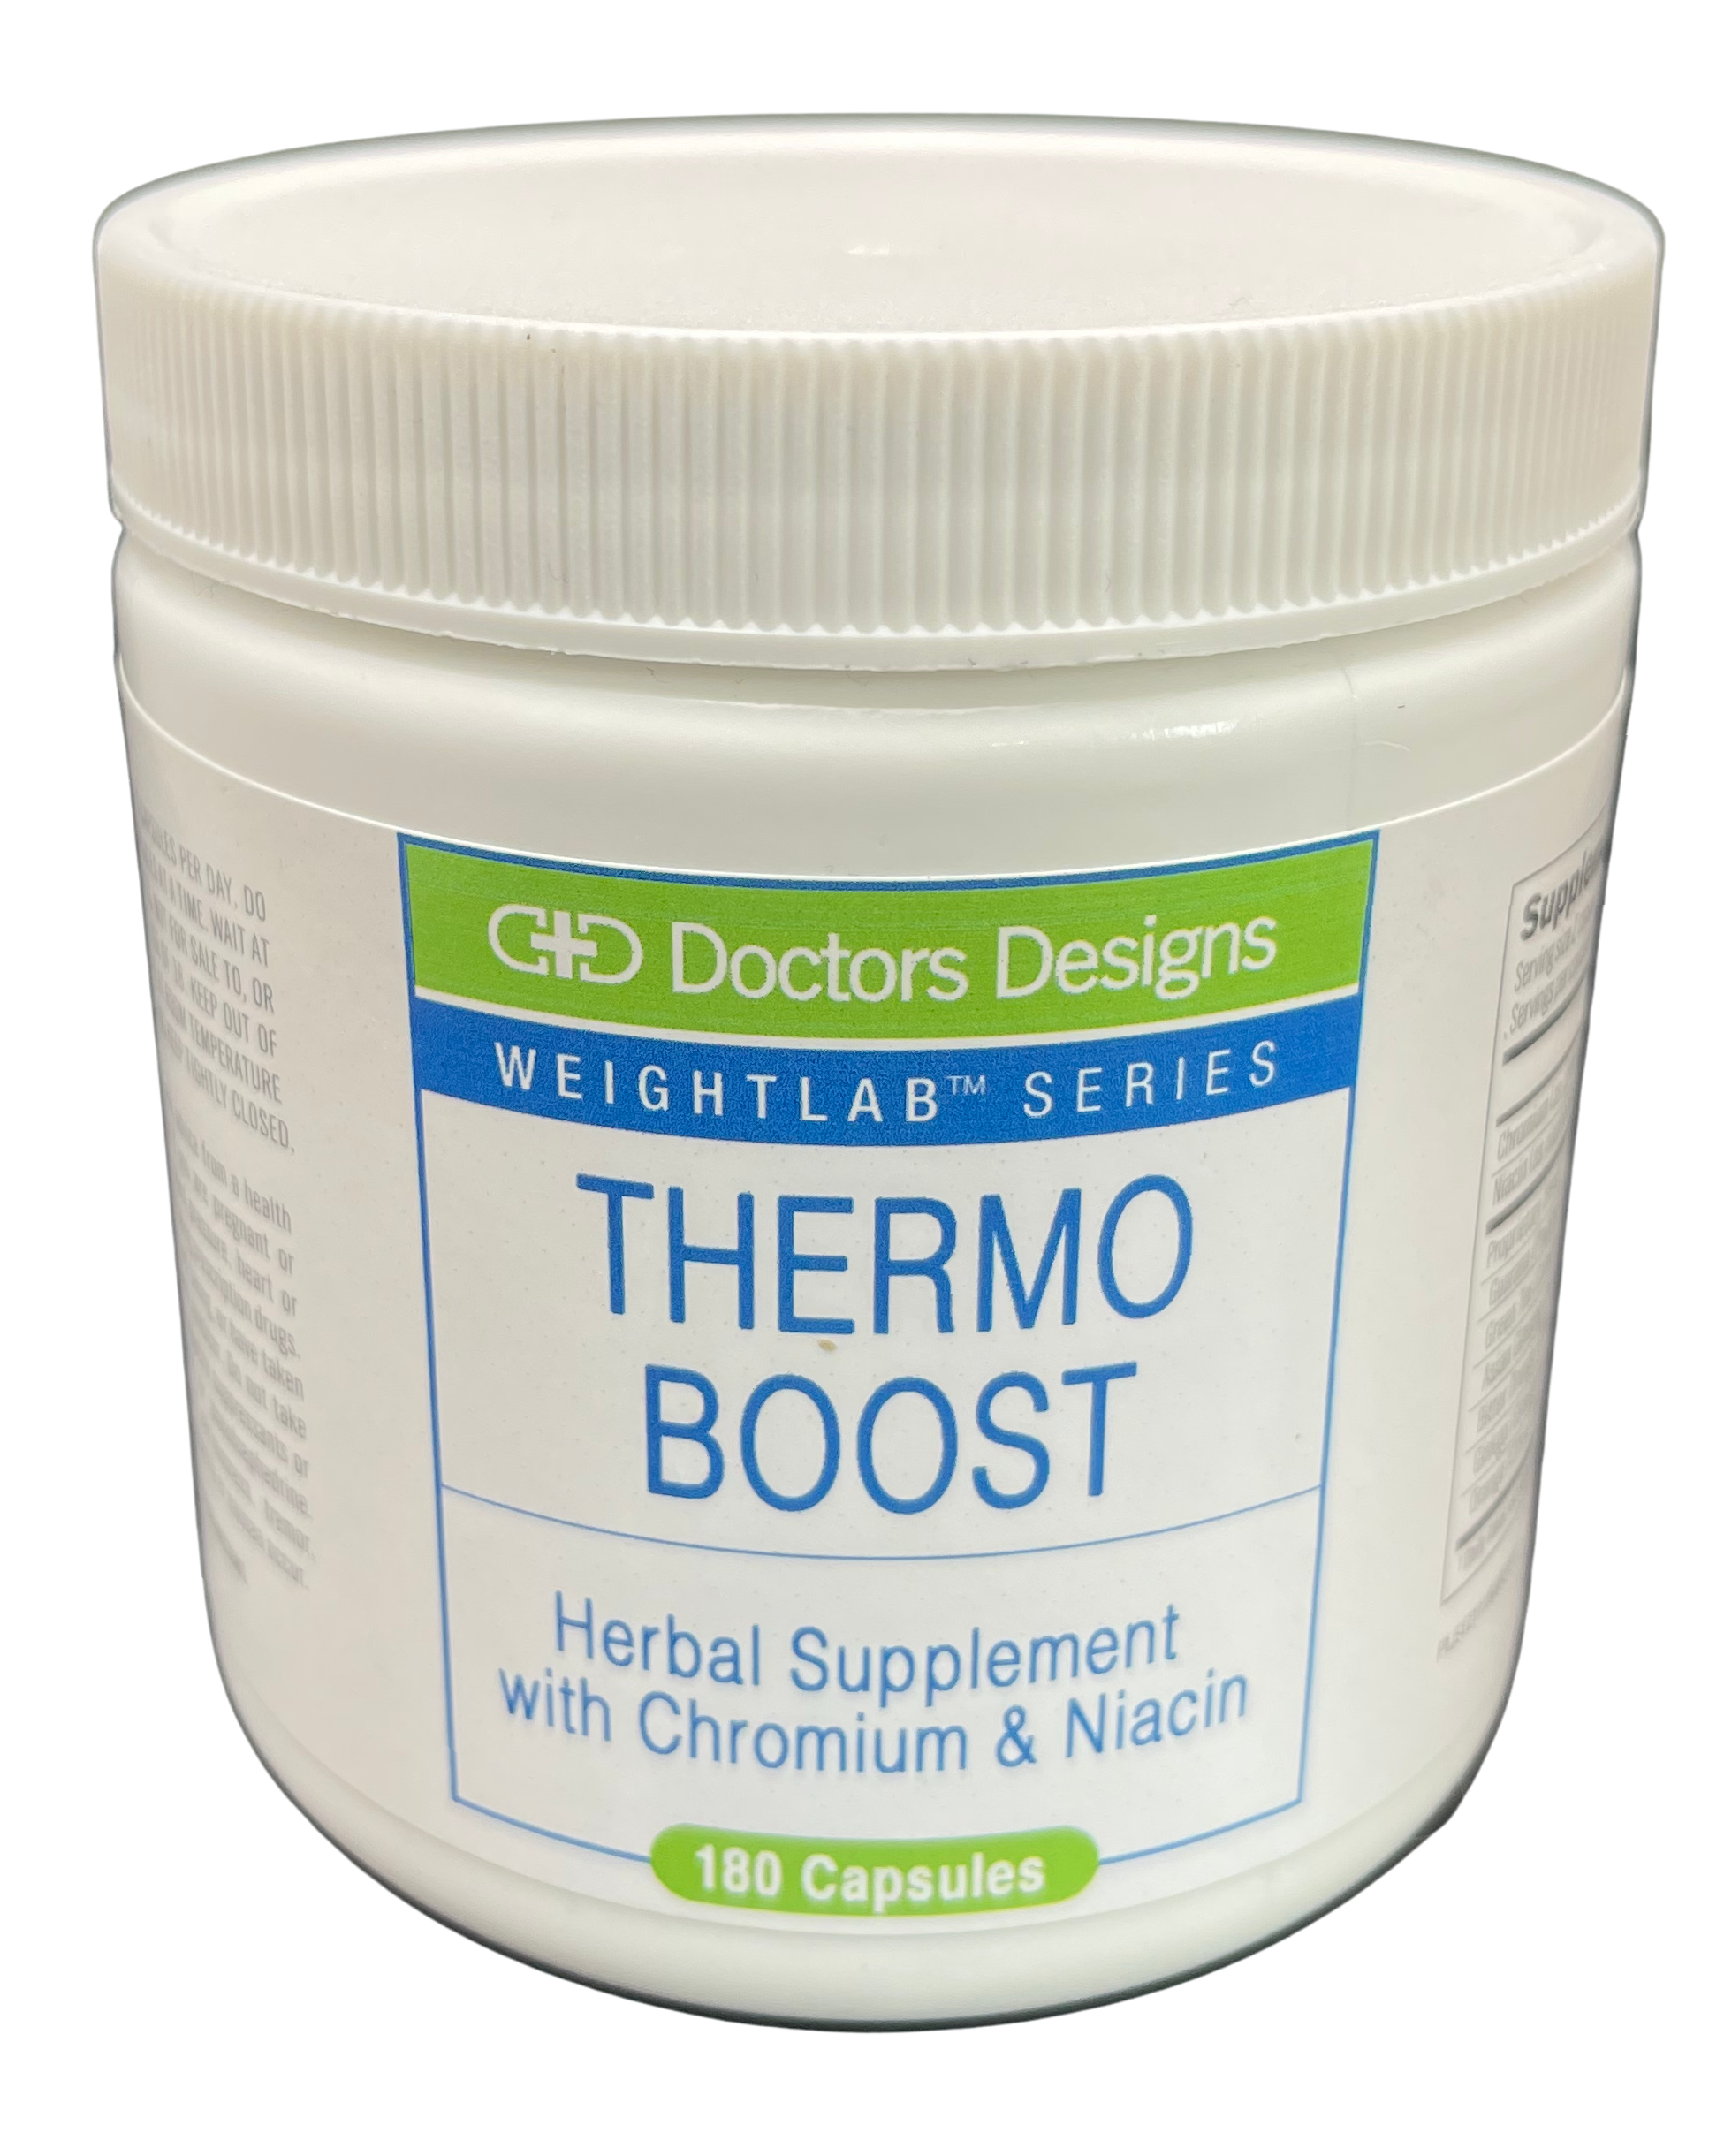 Thermo-Boost Capsules (180 count) by Doctors Designs - High-quality Metabolism Booster by Doctors Designs at 